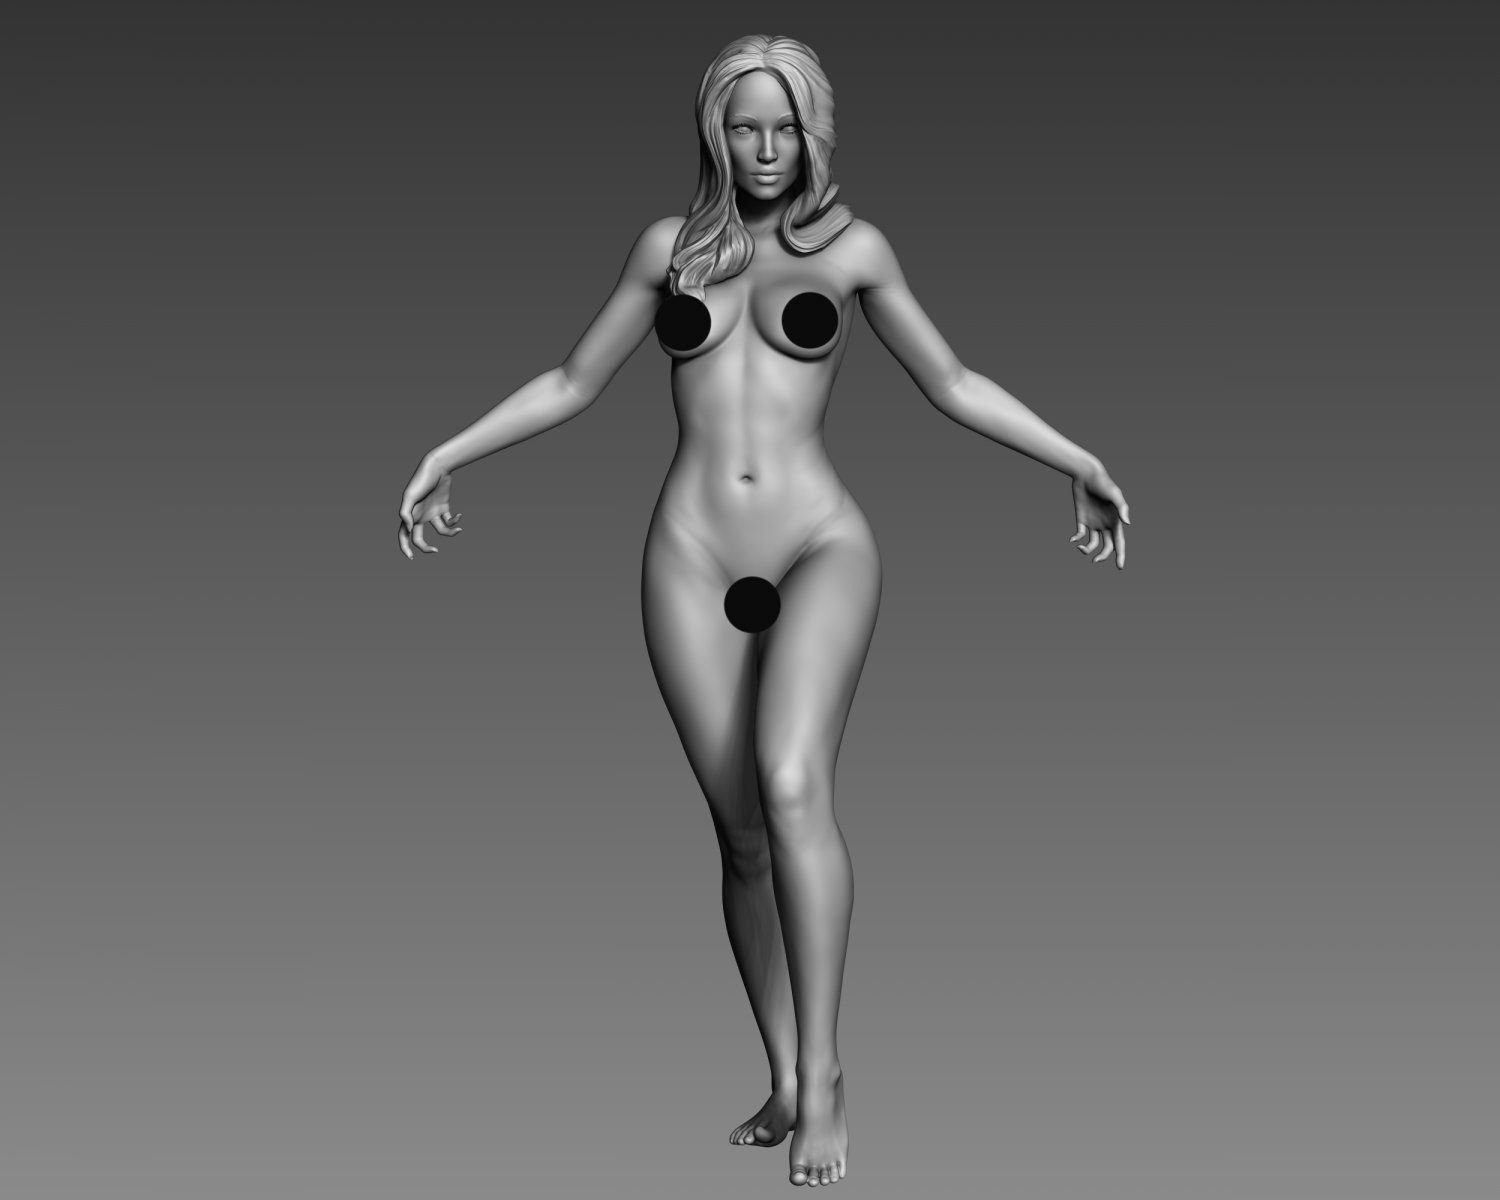 Rigged Rigged Skinned Textured Pbr Nude Model Low.